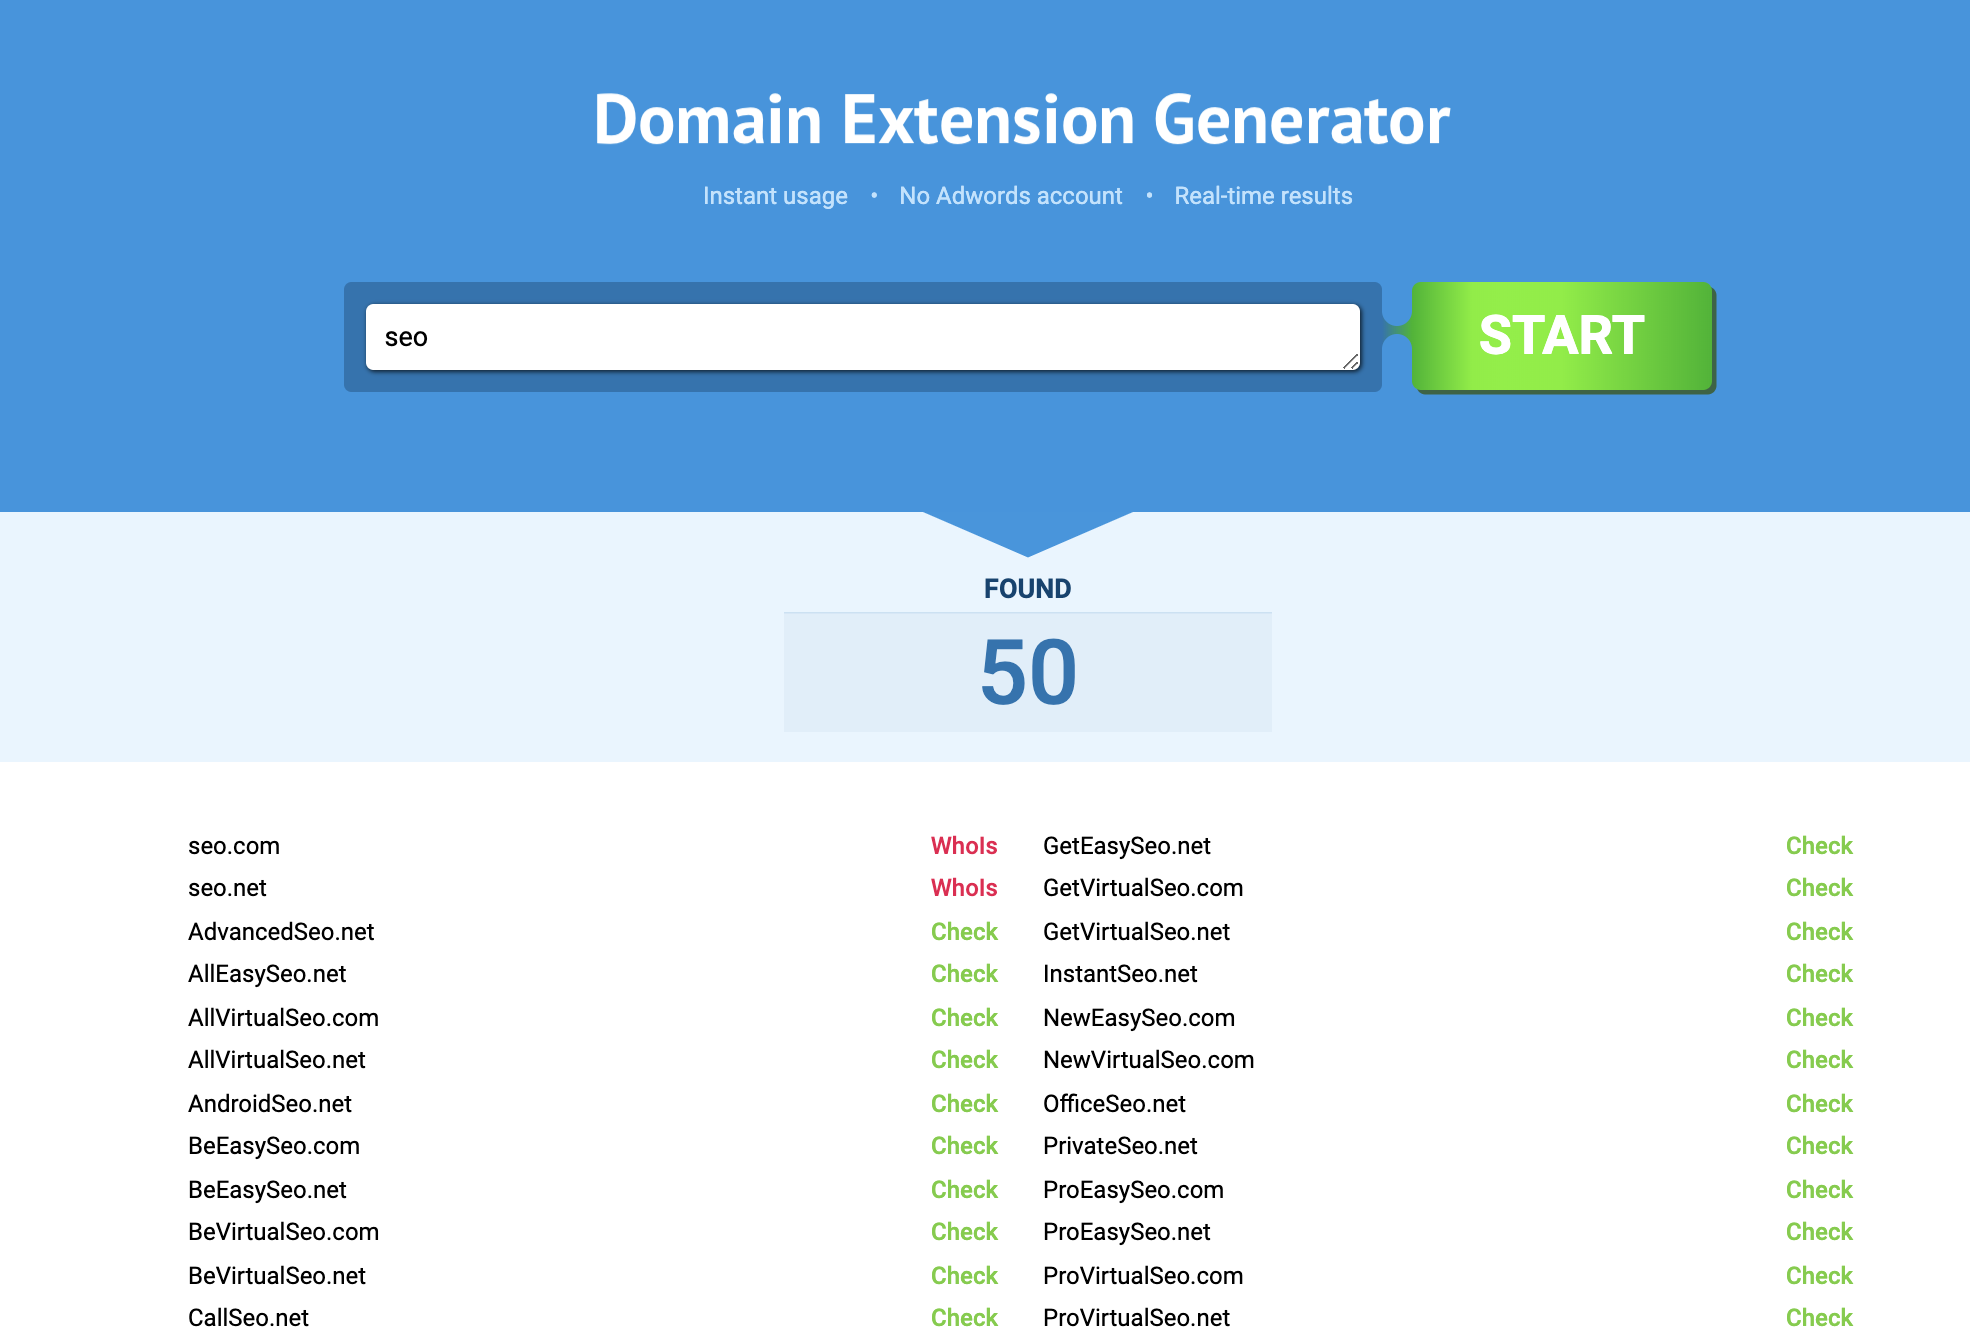 <strong>How To Use Domain Extension Generator?</strong>